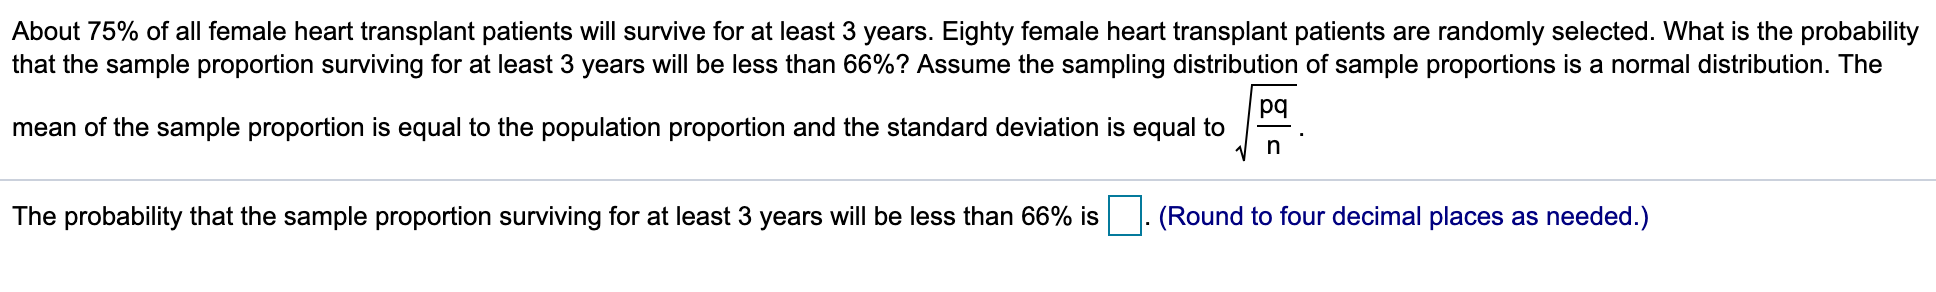 About 75% of all female heart transplant patients will survive for at least 3 years. Eighty female heart transplant patients are randomly selected. What is the probability
that the sample proportion surviving for at least 3 years will be less than 66%? Assume the sampling distribution of sample proportions is a normal distribution. The
pq
mean of the sample proportion is equal to the population proportion and the standard deviation is equal to
The probability that the sample proportion surviving for at least 3 years will be less than 66% is
(Round to four decimal places as needed.)
